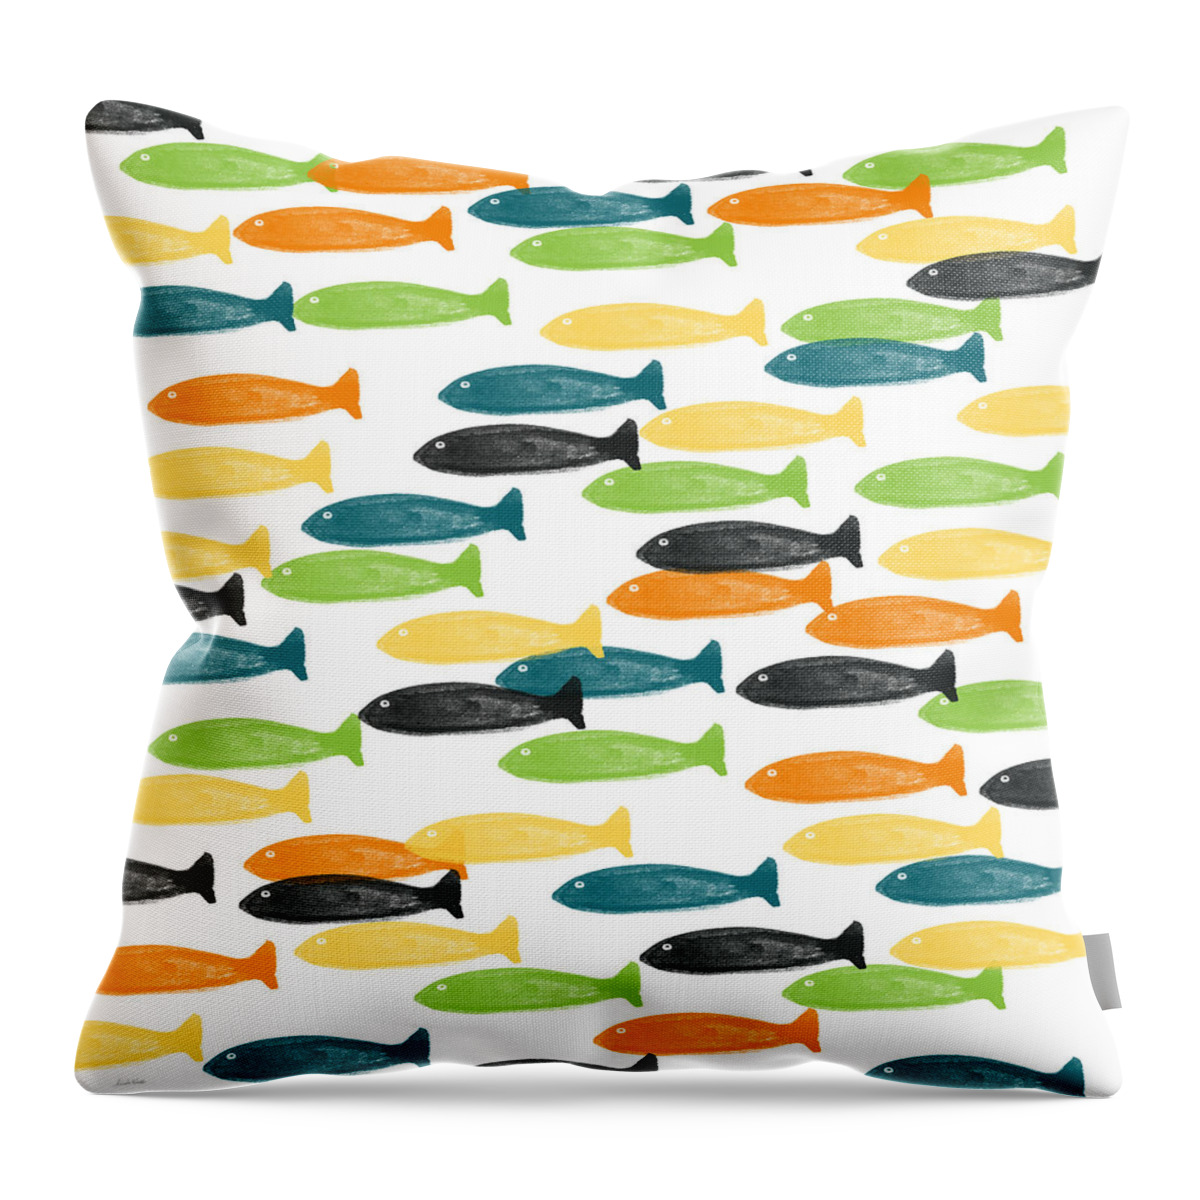 Fish Pond River Fishing Blue Green Orange Yellow Fish Pattern Art For Kids Room Dorm Room Art Cabin Art Hunting And Fishing Modern Fish Abstract Fish Art Outdoors Bedroom Art Kitchen Art Living Room Art Gallery Wall Art Art For Interior Designers Hospitality Art Set Design Wedding Gift Art By Linda Woods Throw Pillow featuring the painting Colorful Fish #1 by Linda Woods